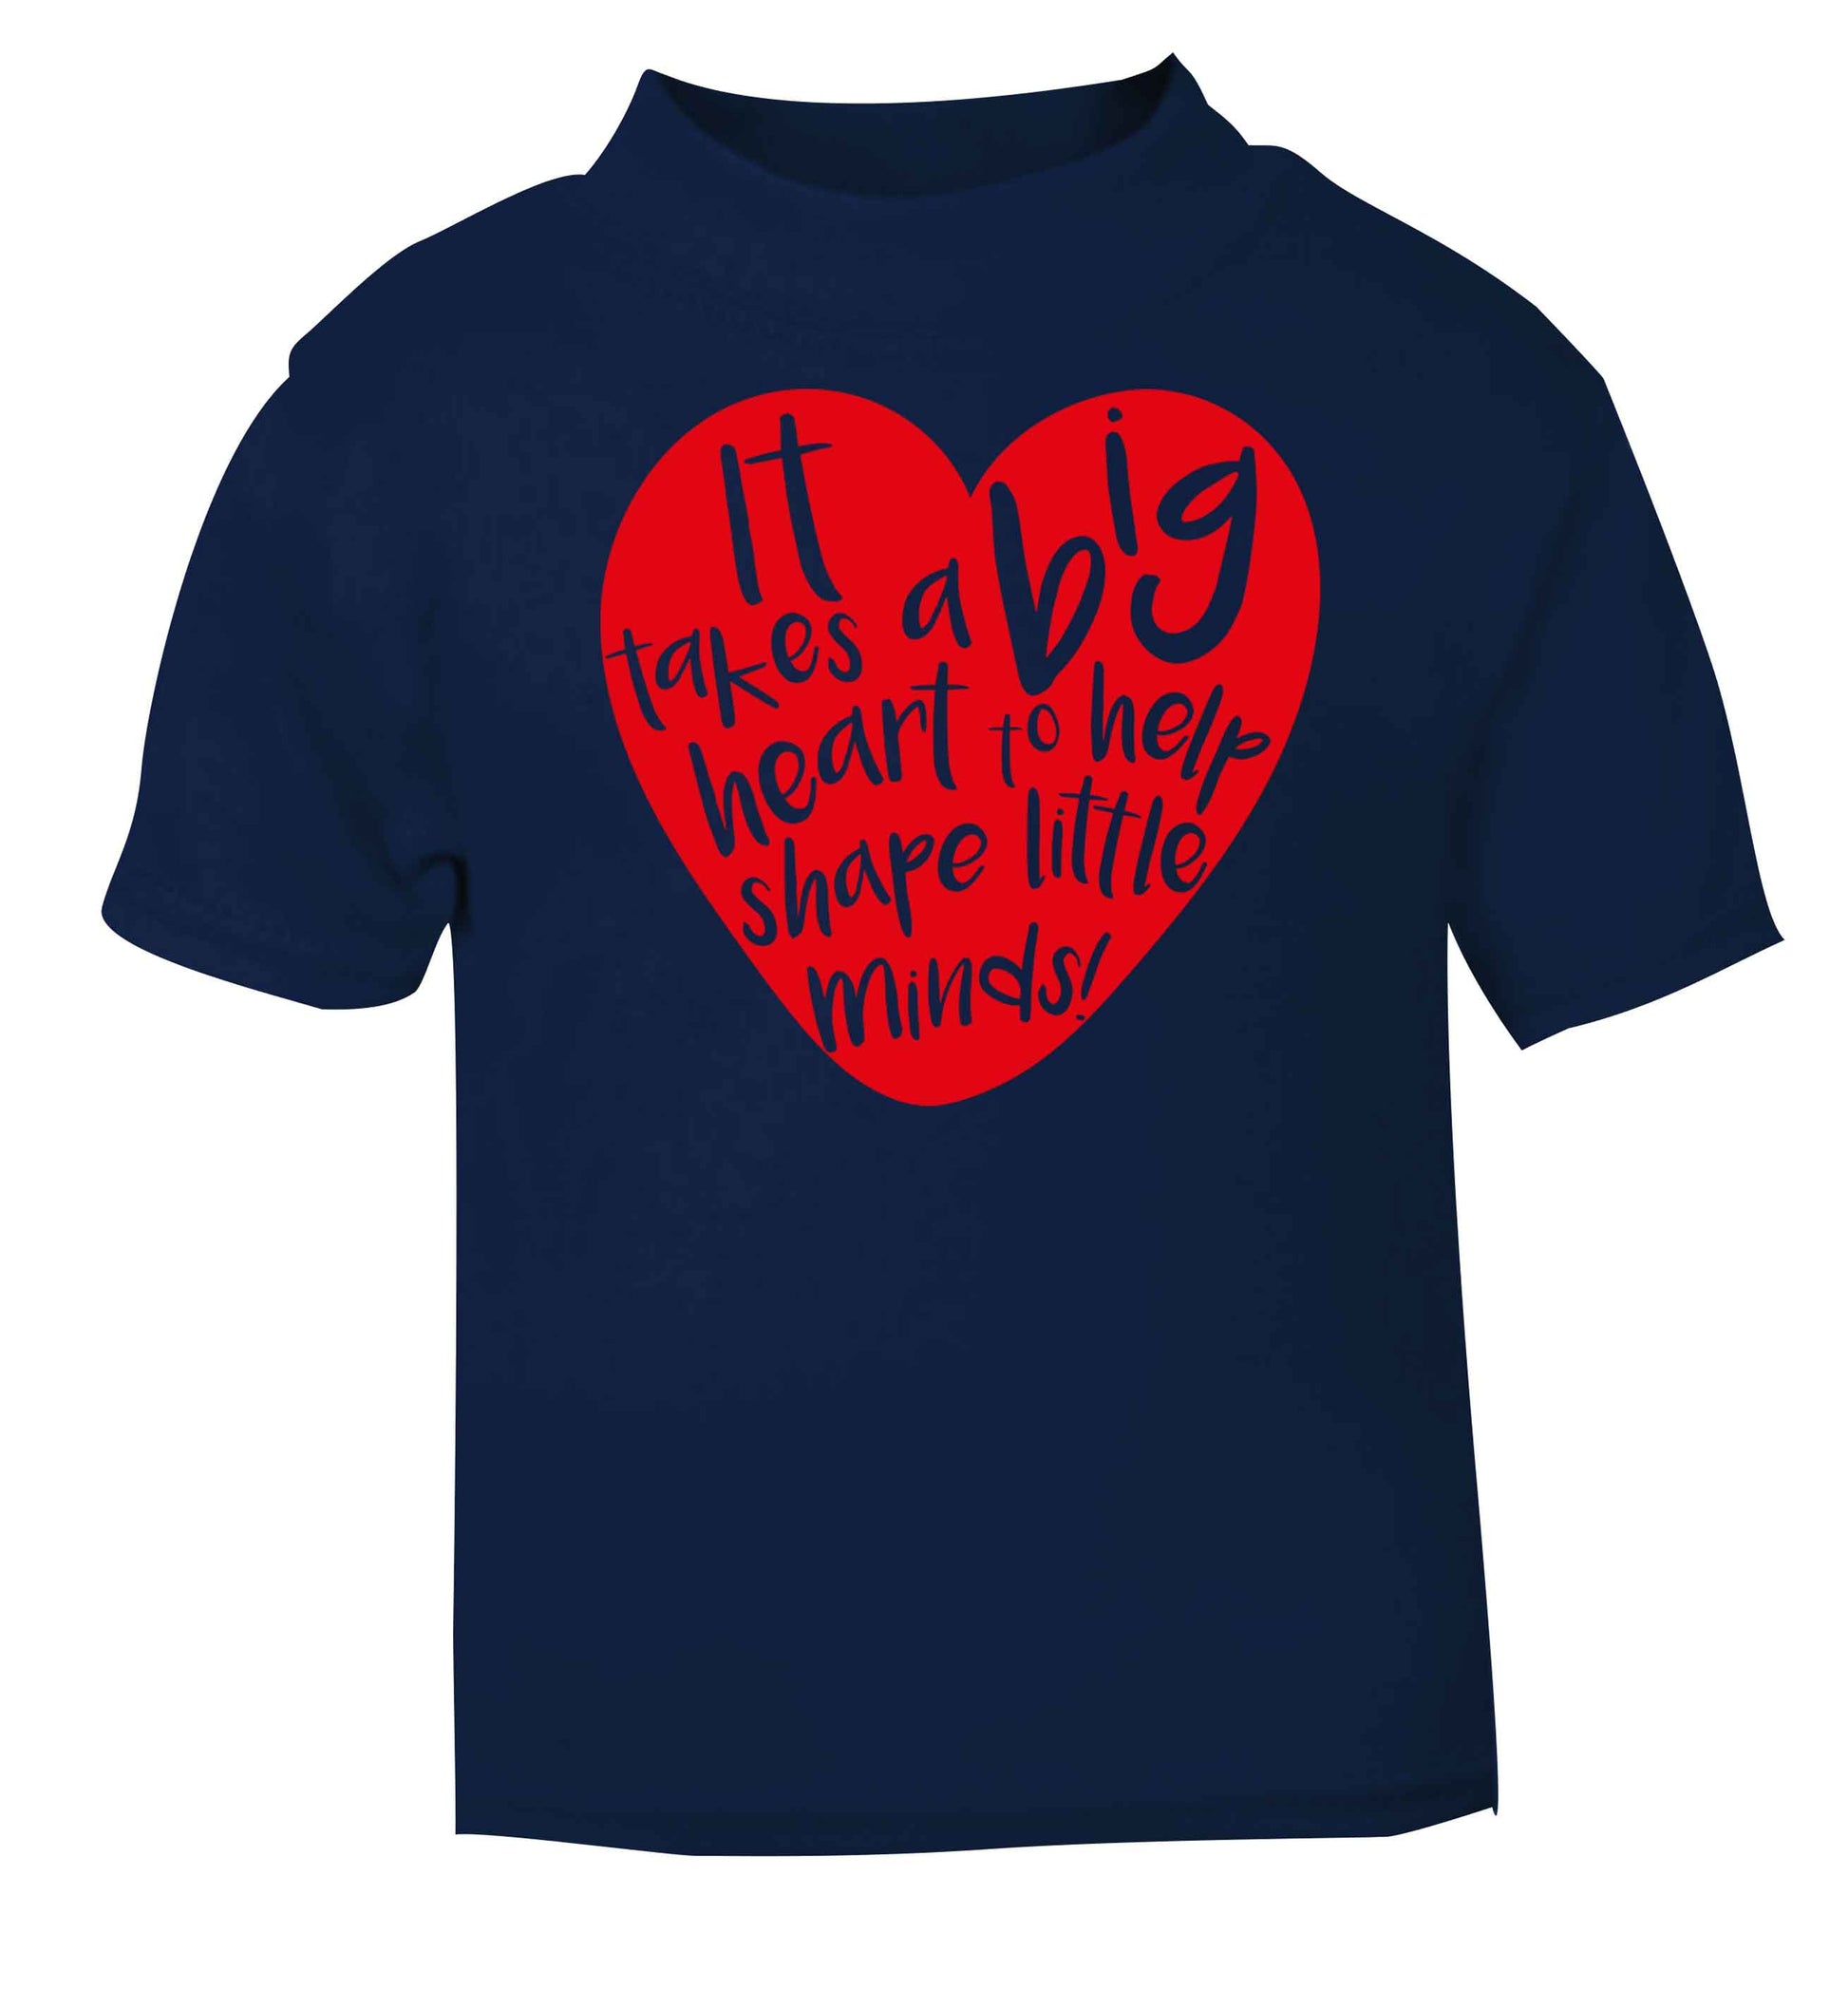 It takes a big heart to help shape little minds navy baby toddler Tshirt 2 Years